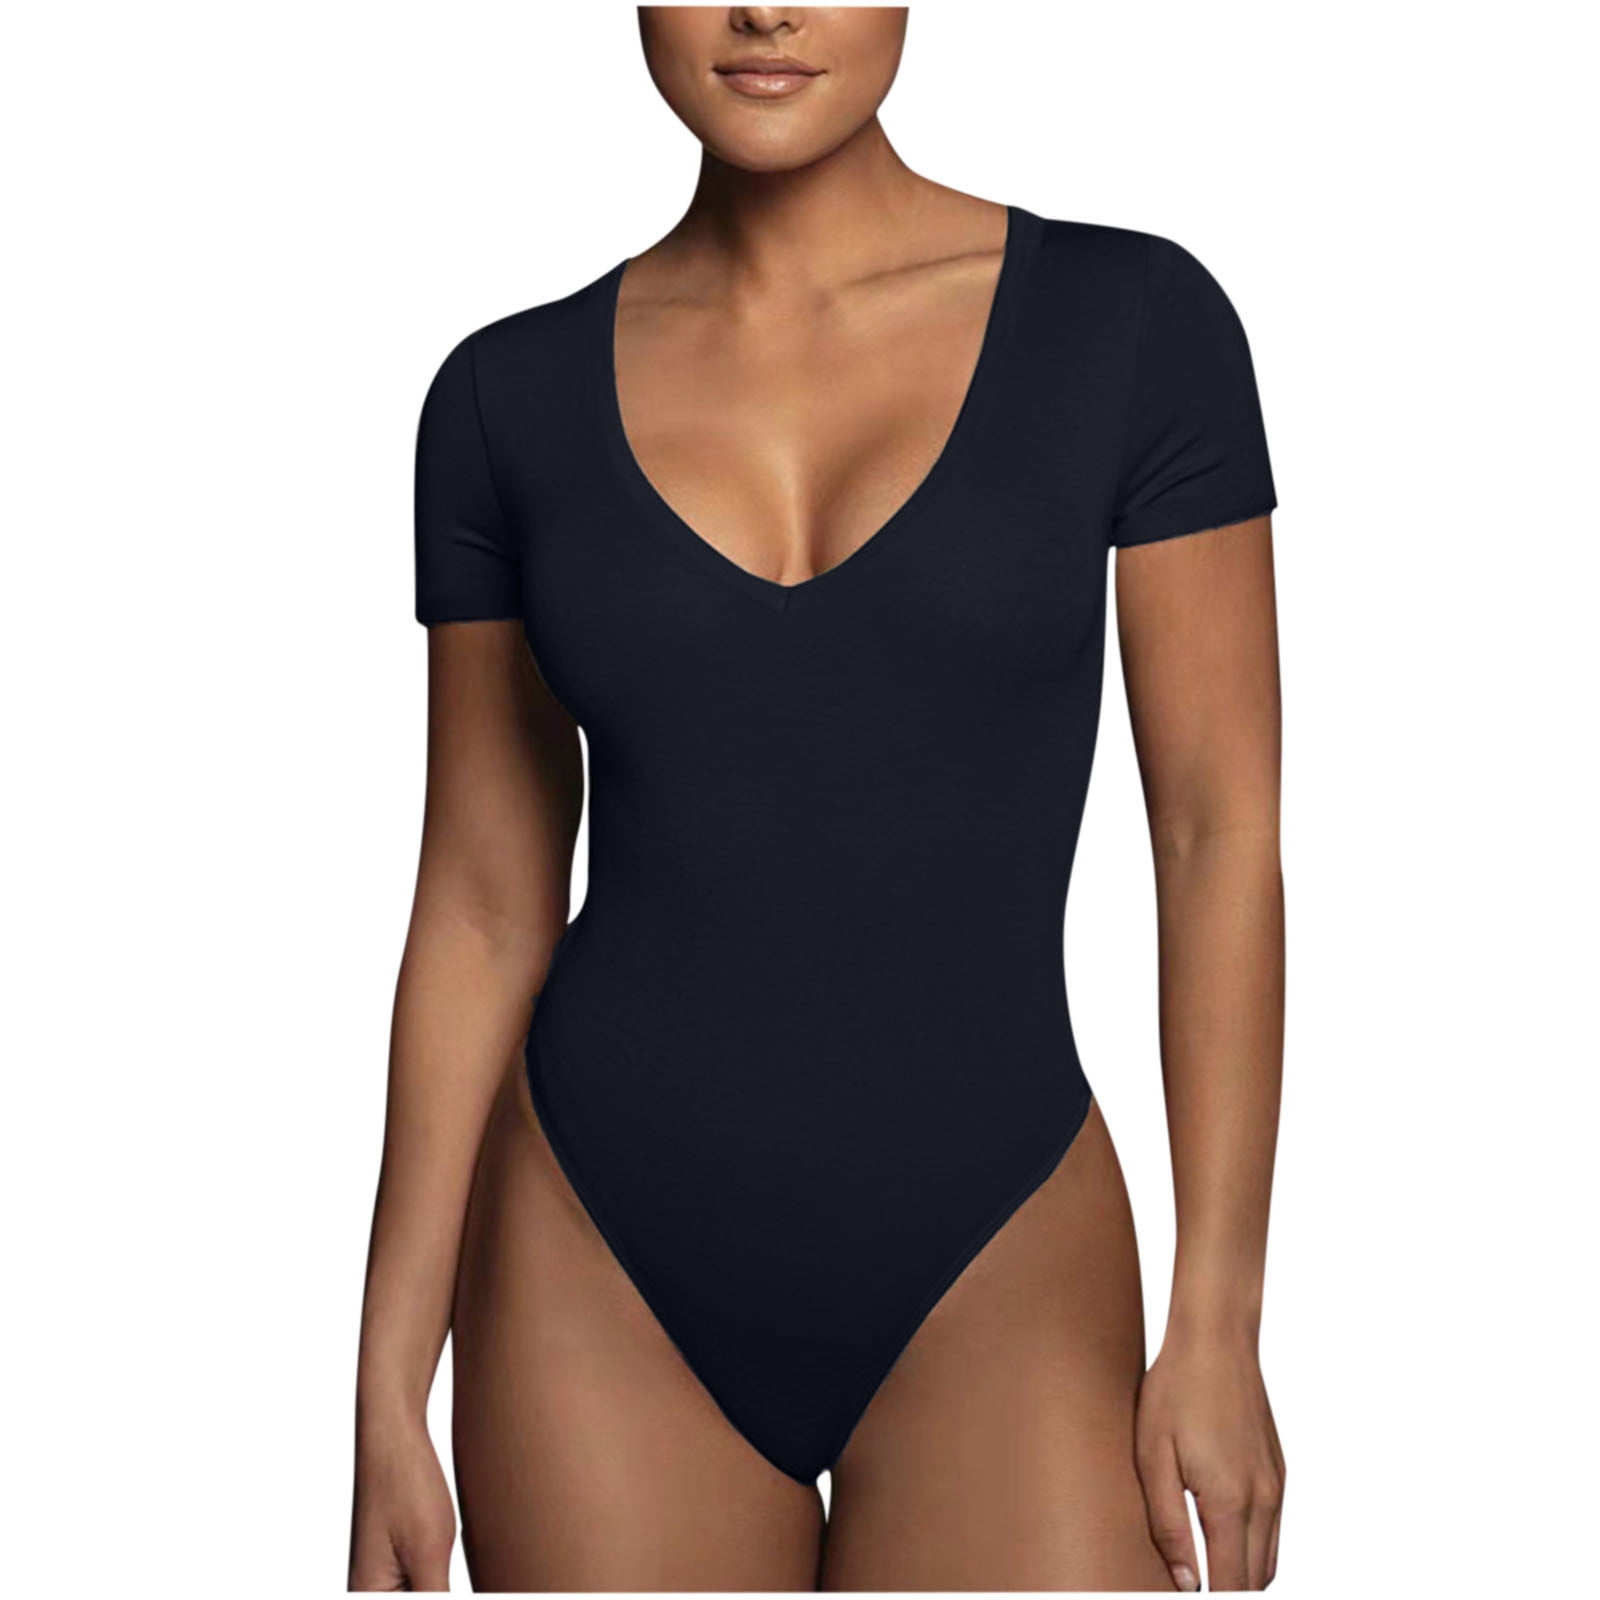  Bodysuit for Women Deep V Neck Long Sleeve Bodysuit, Sexy Thong  Body Shaper T Shirts Tops (Color : Black, Size : Medium) : Clothing, Shoes  & Jewelry